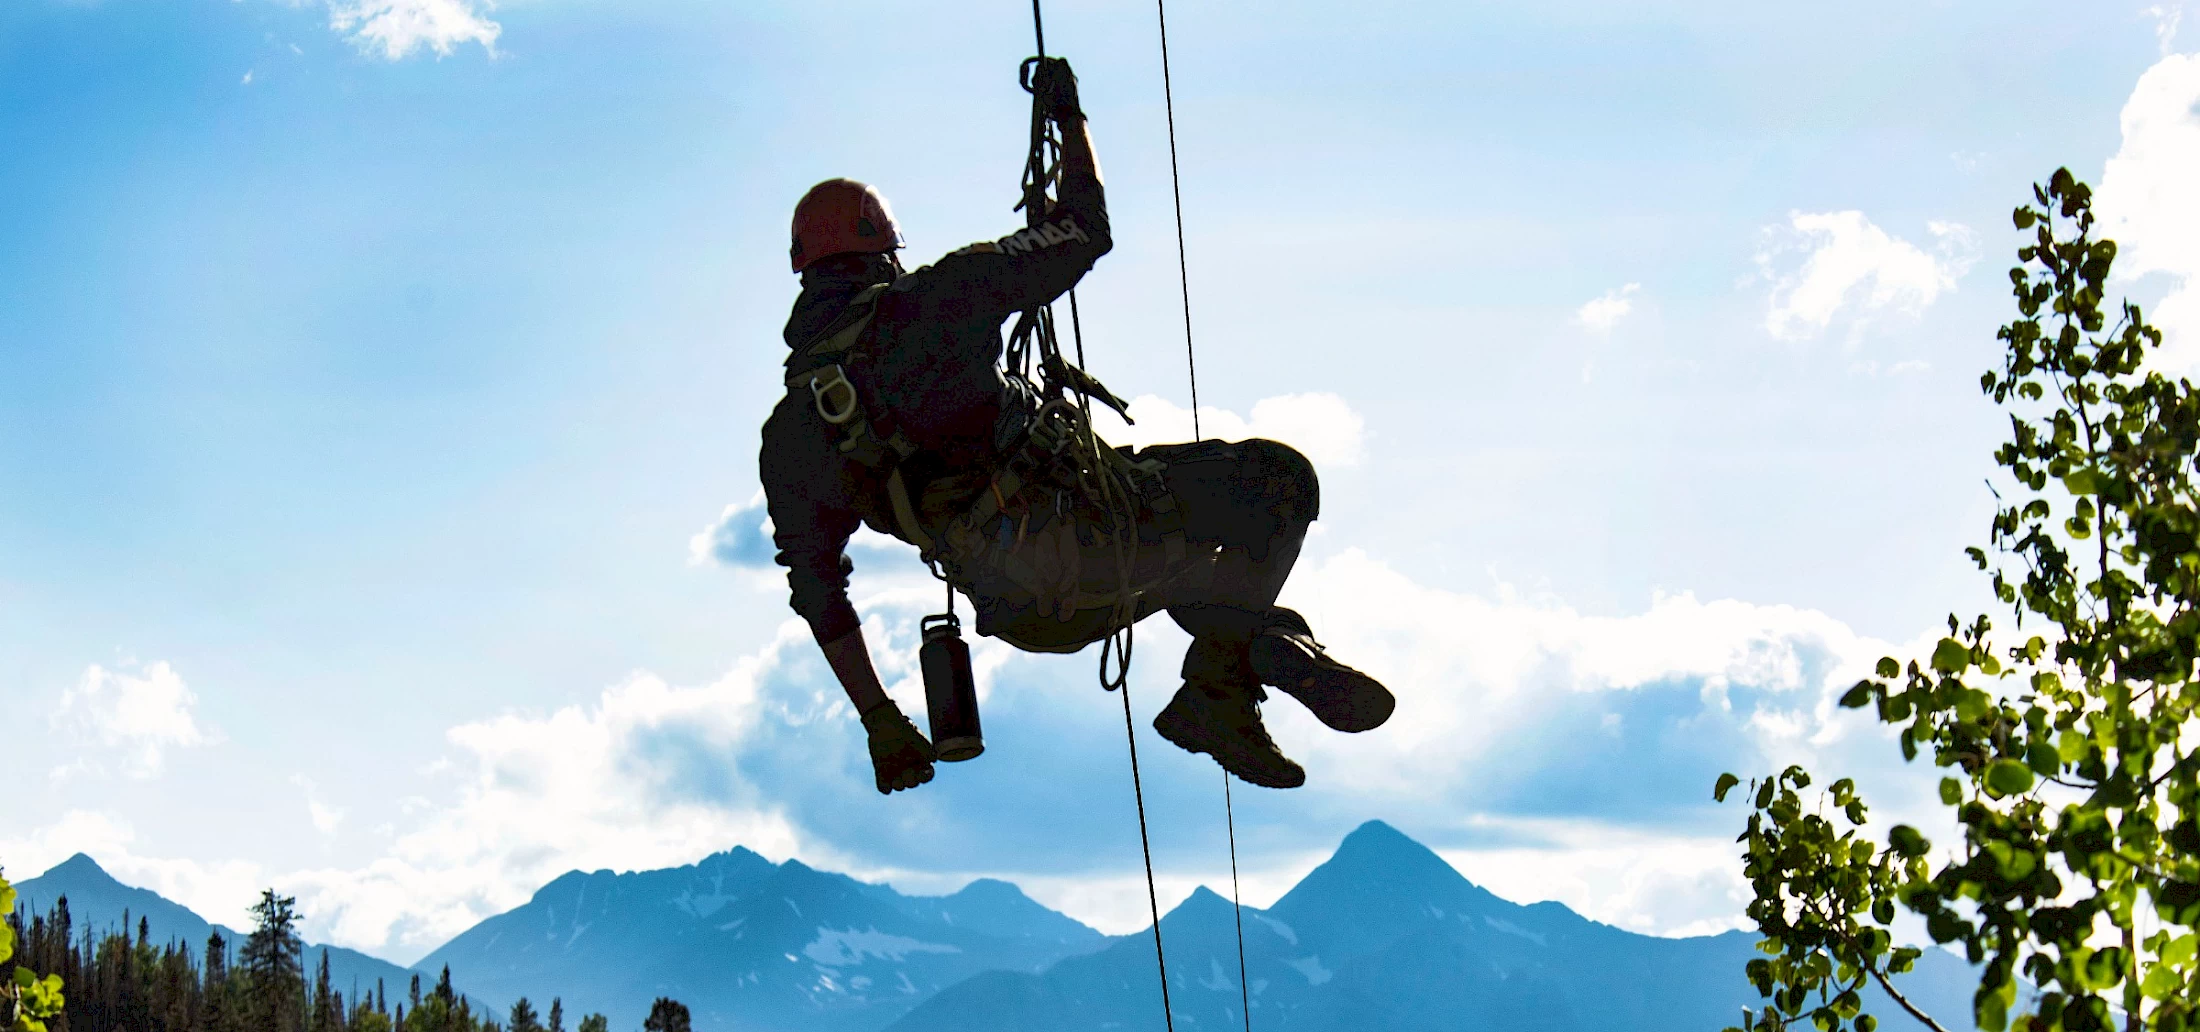 image of a person on a zip line | Telluride